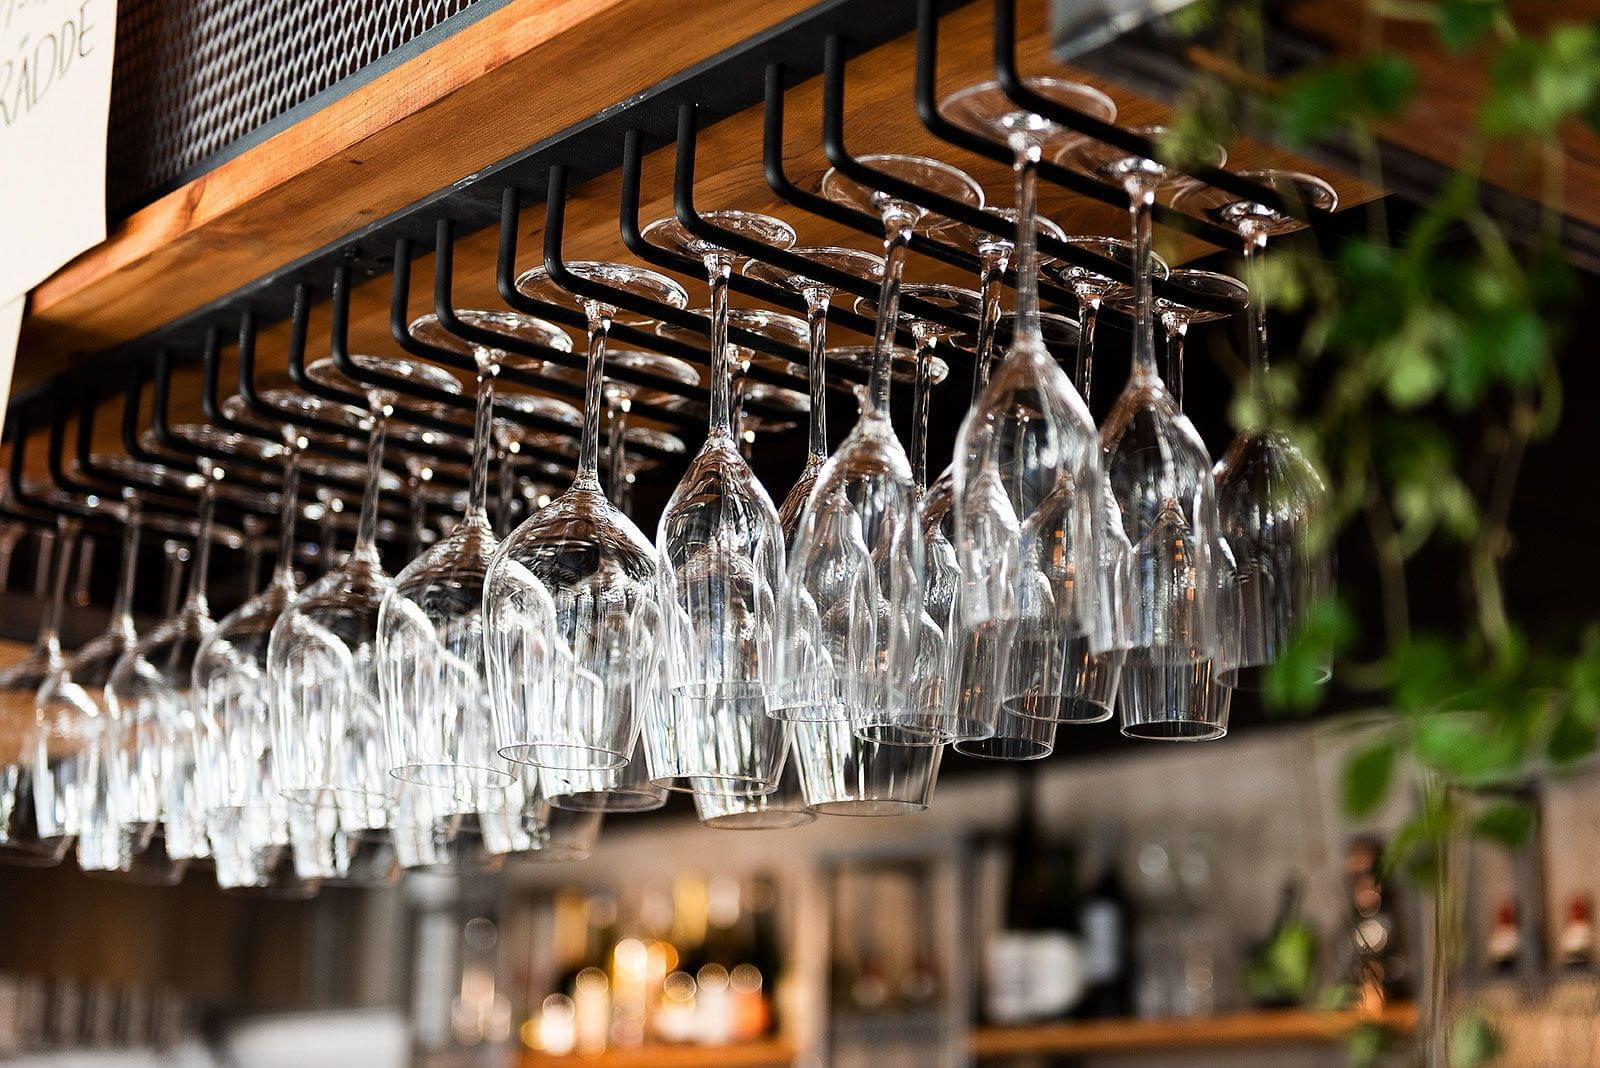 Glasses hanging in the bar ceiling